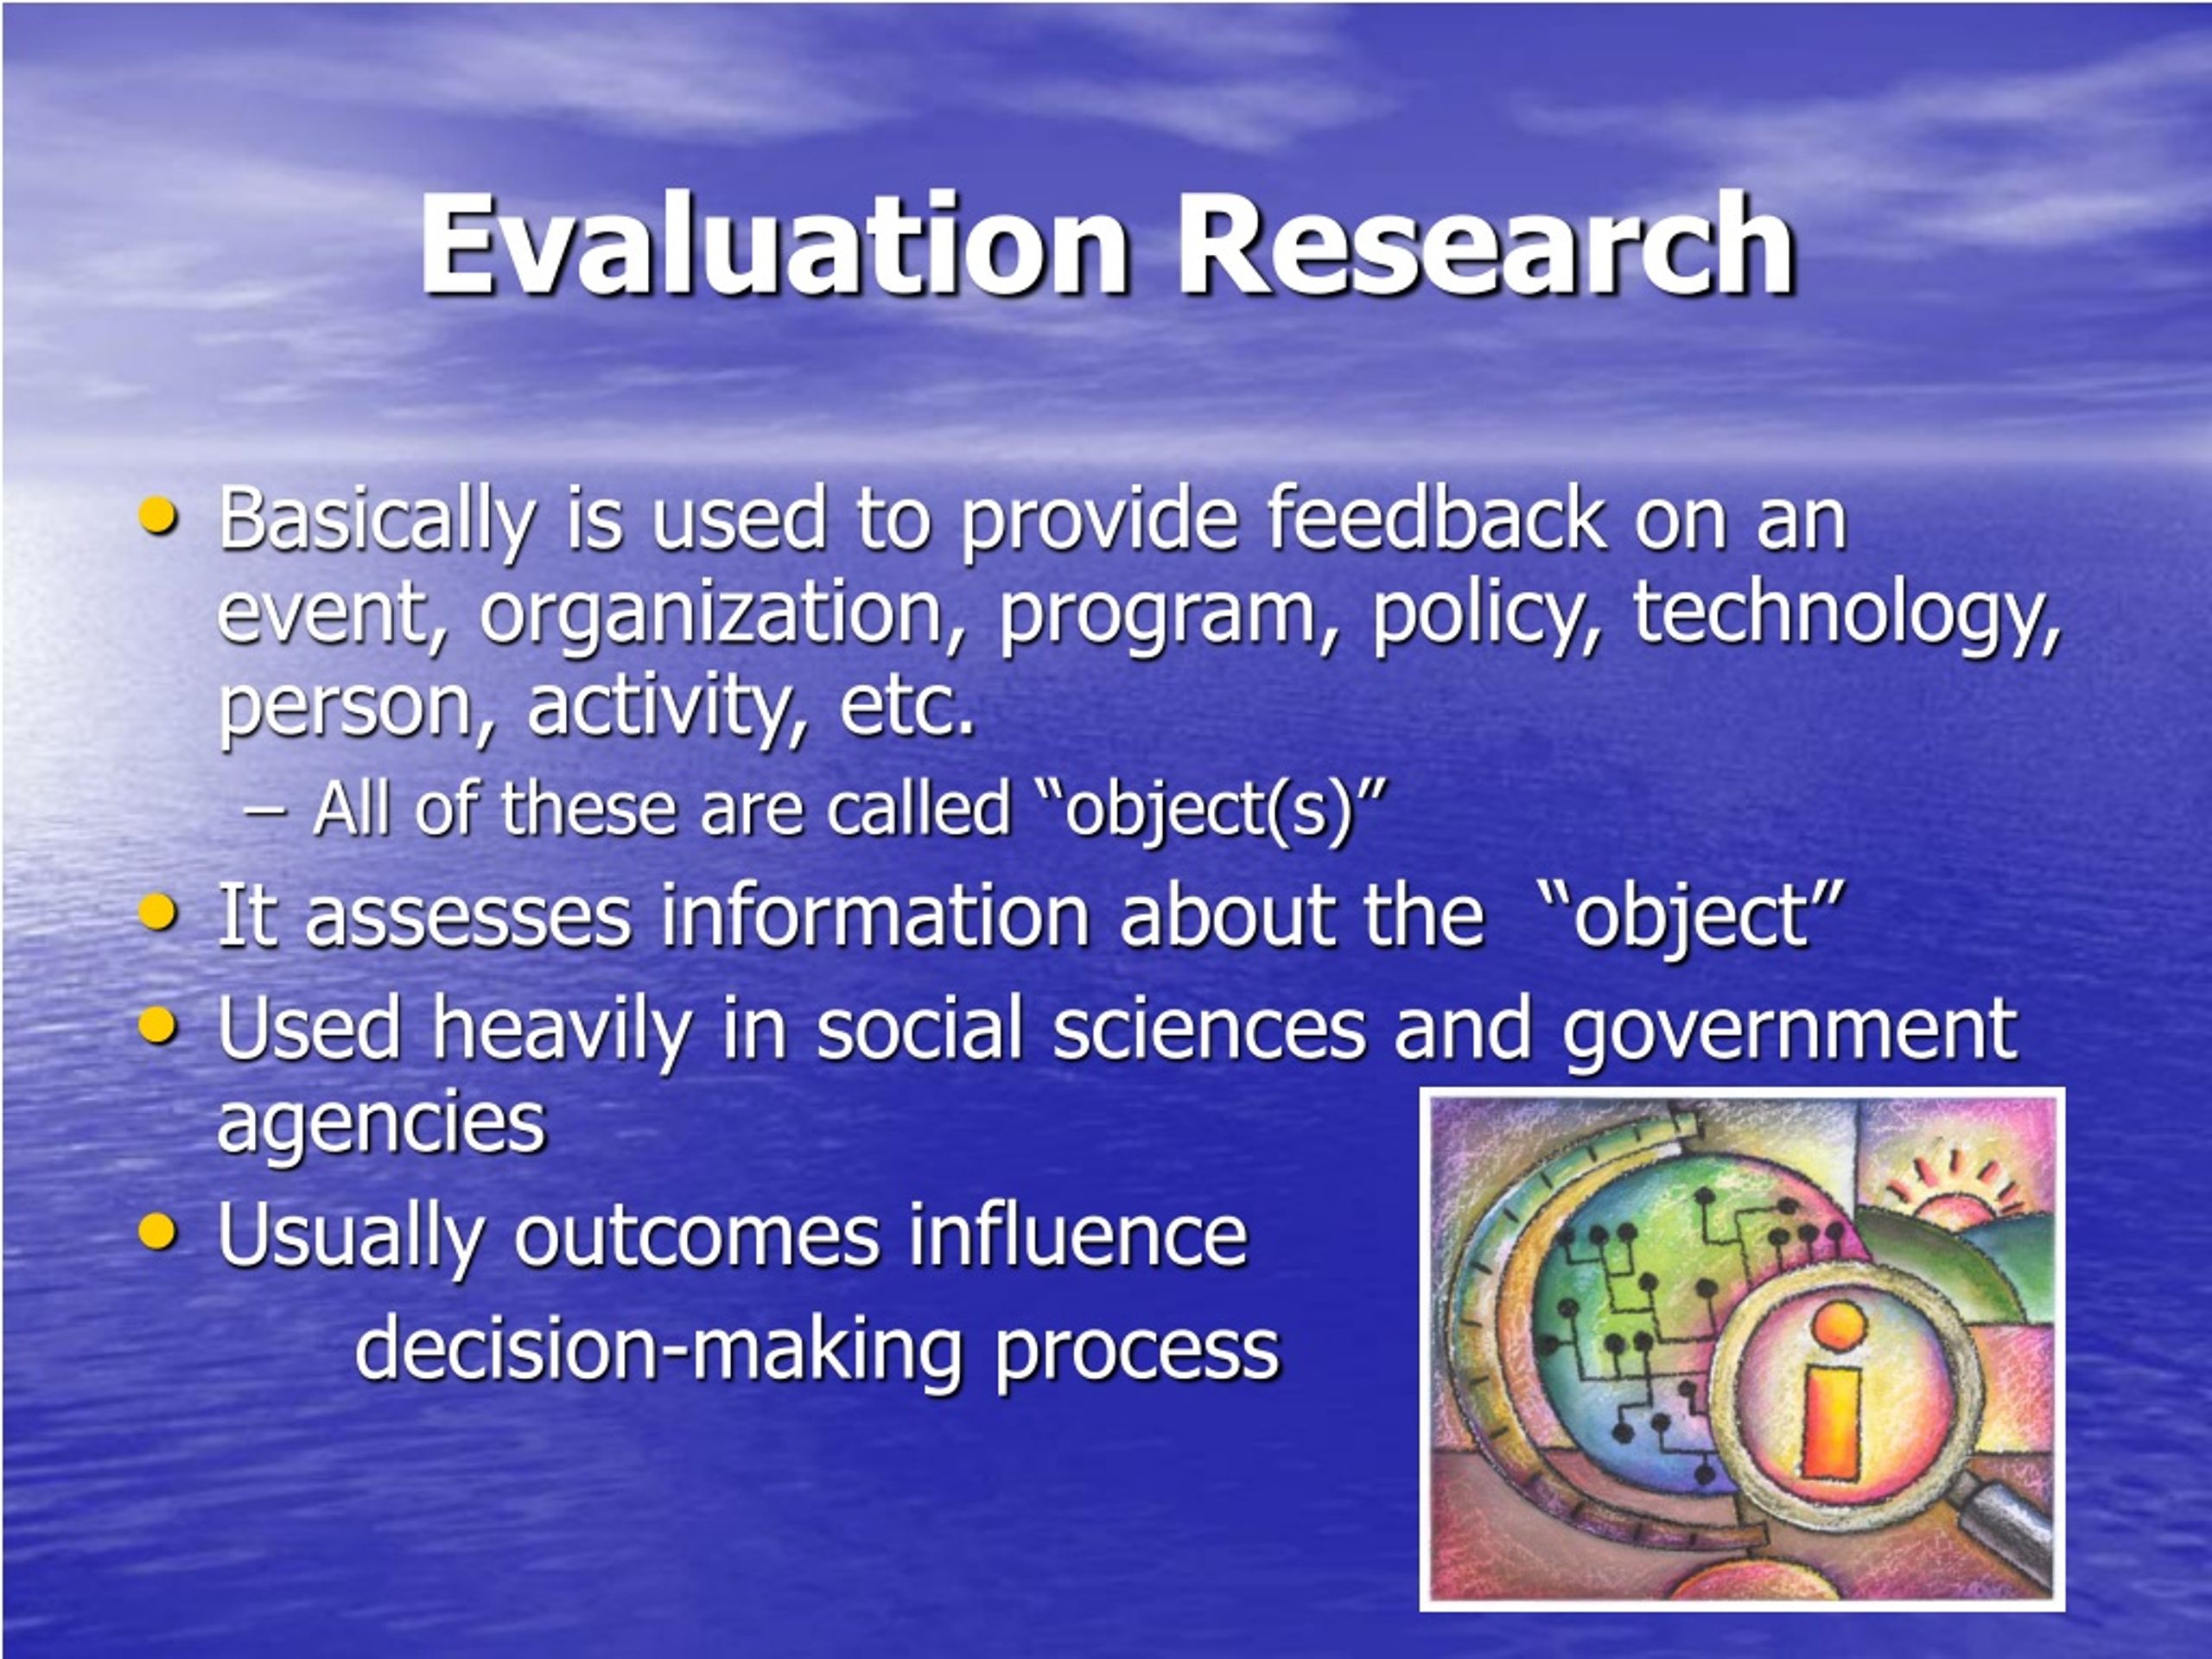 evaluation of research report slideshare